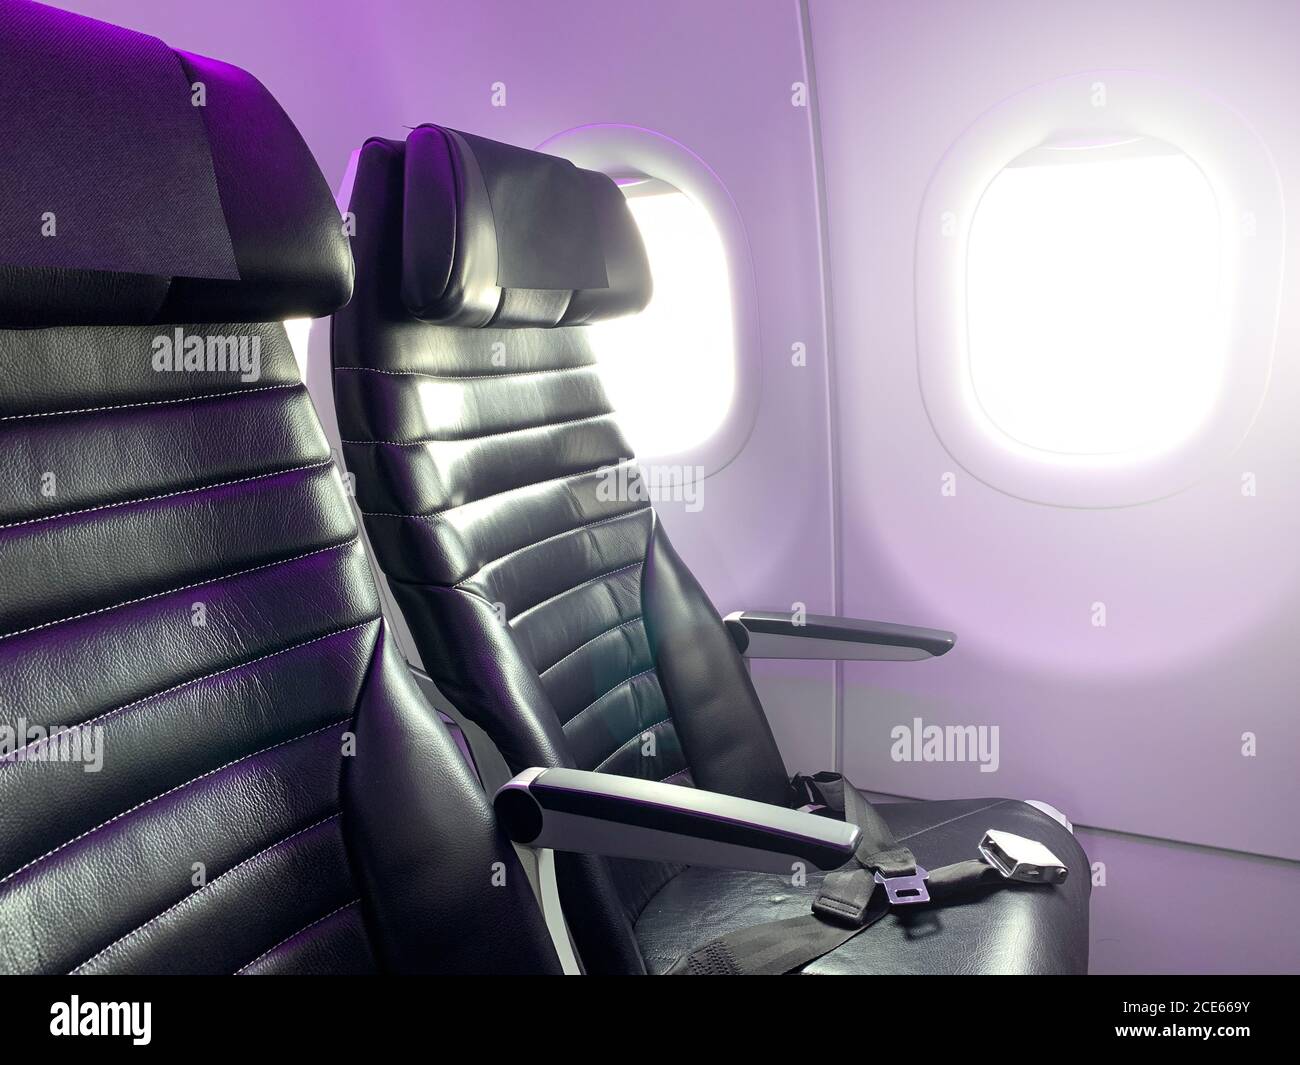 Airplane seats in the cabin economy class. Stock Photo